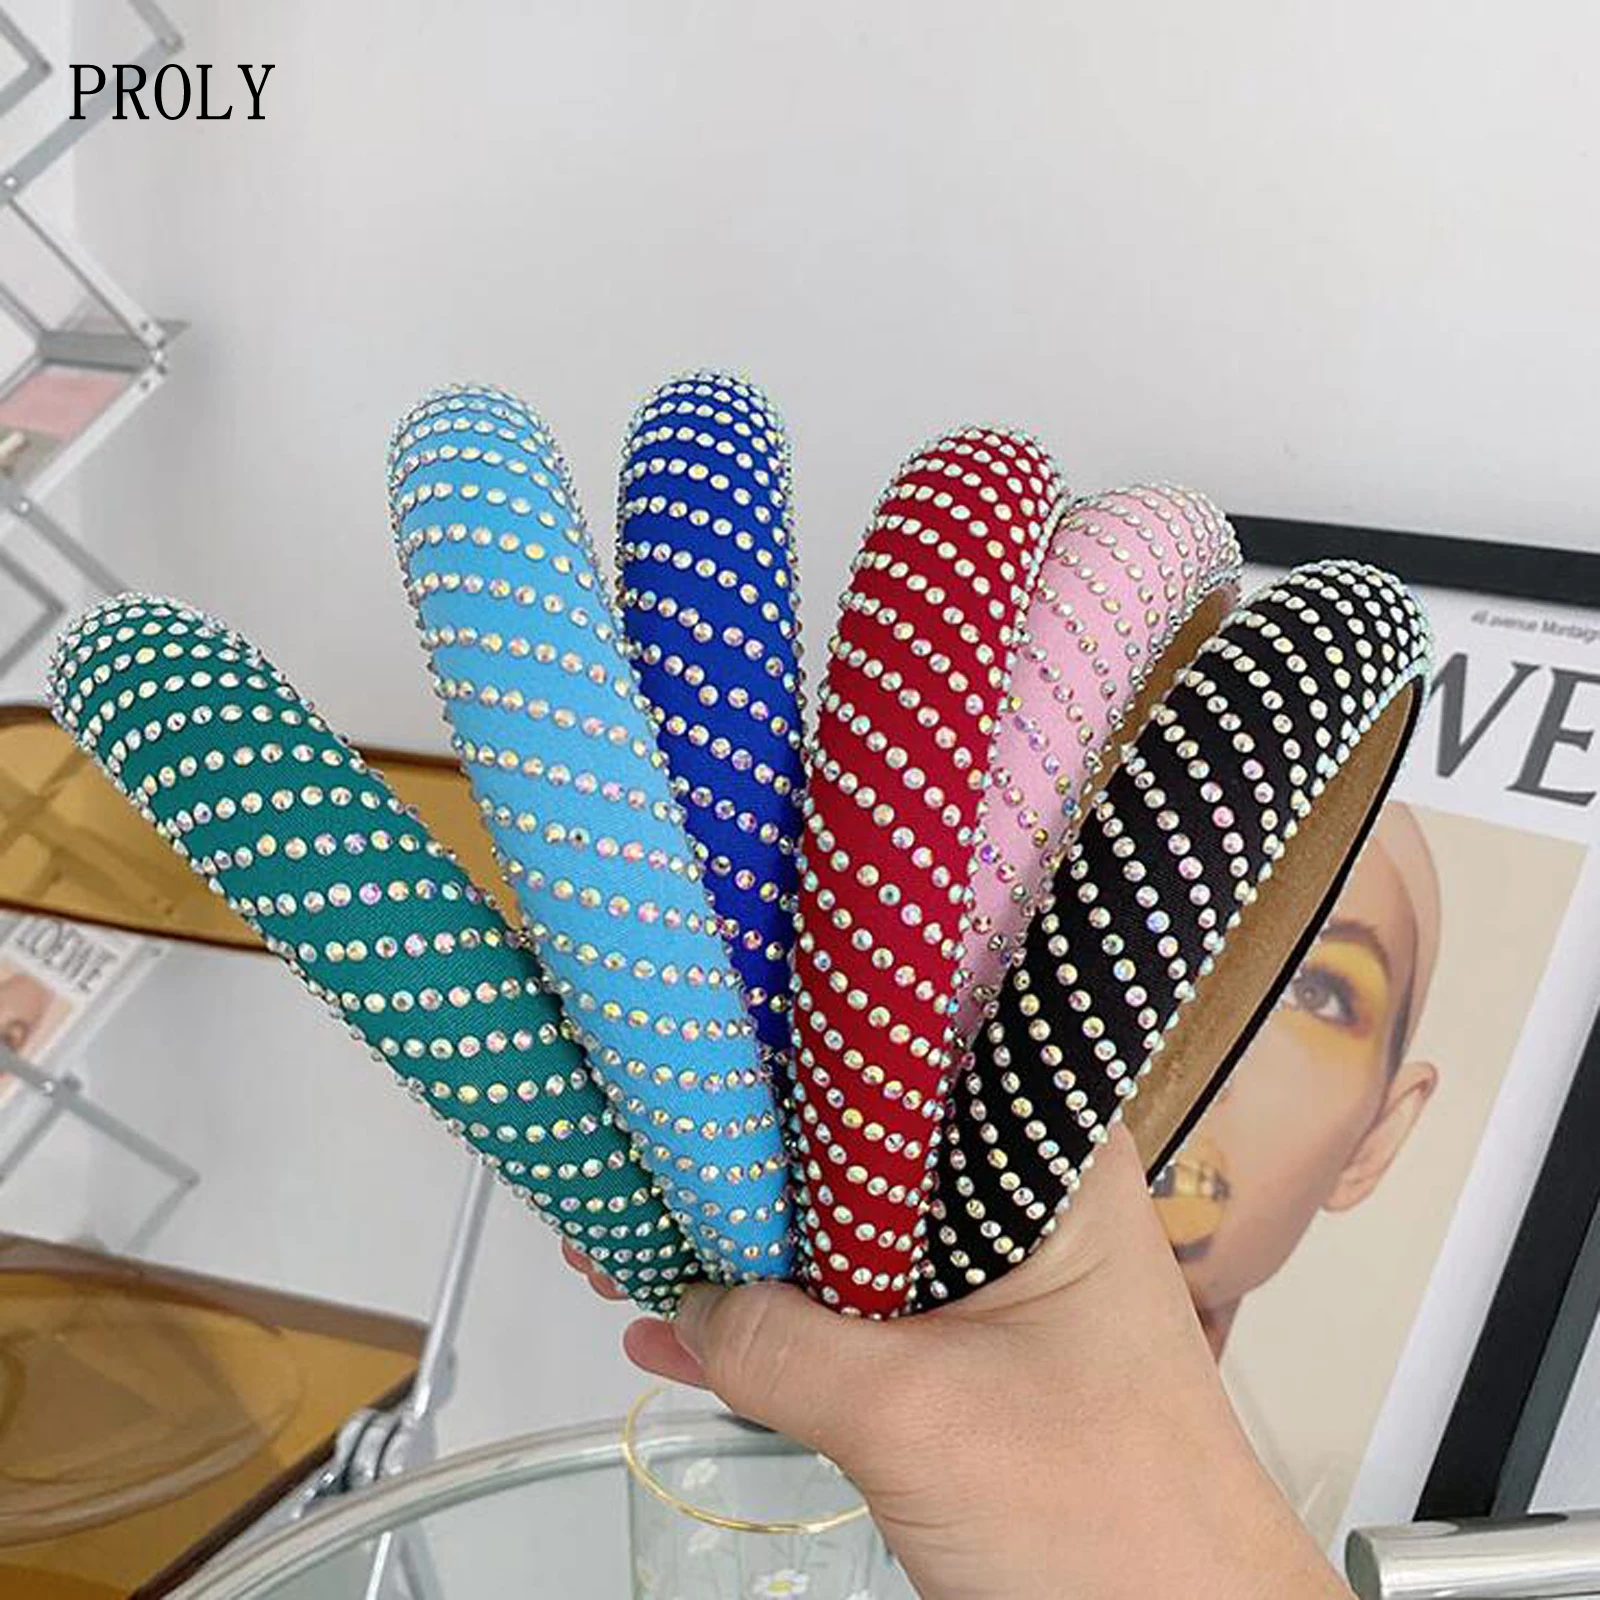 

PROLY New Fashion Hot Drilling Sponge Headband For Women Wide Side Baroque Hairband Solid Color Casual Hair Accessories